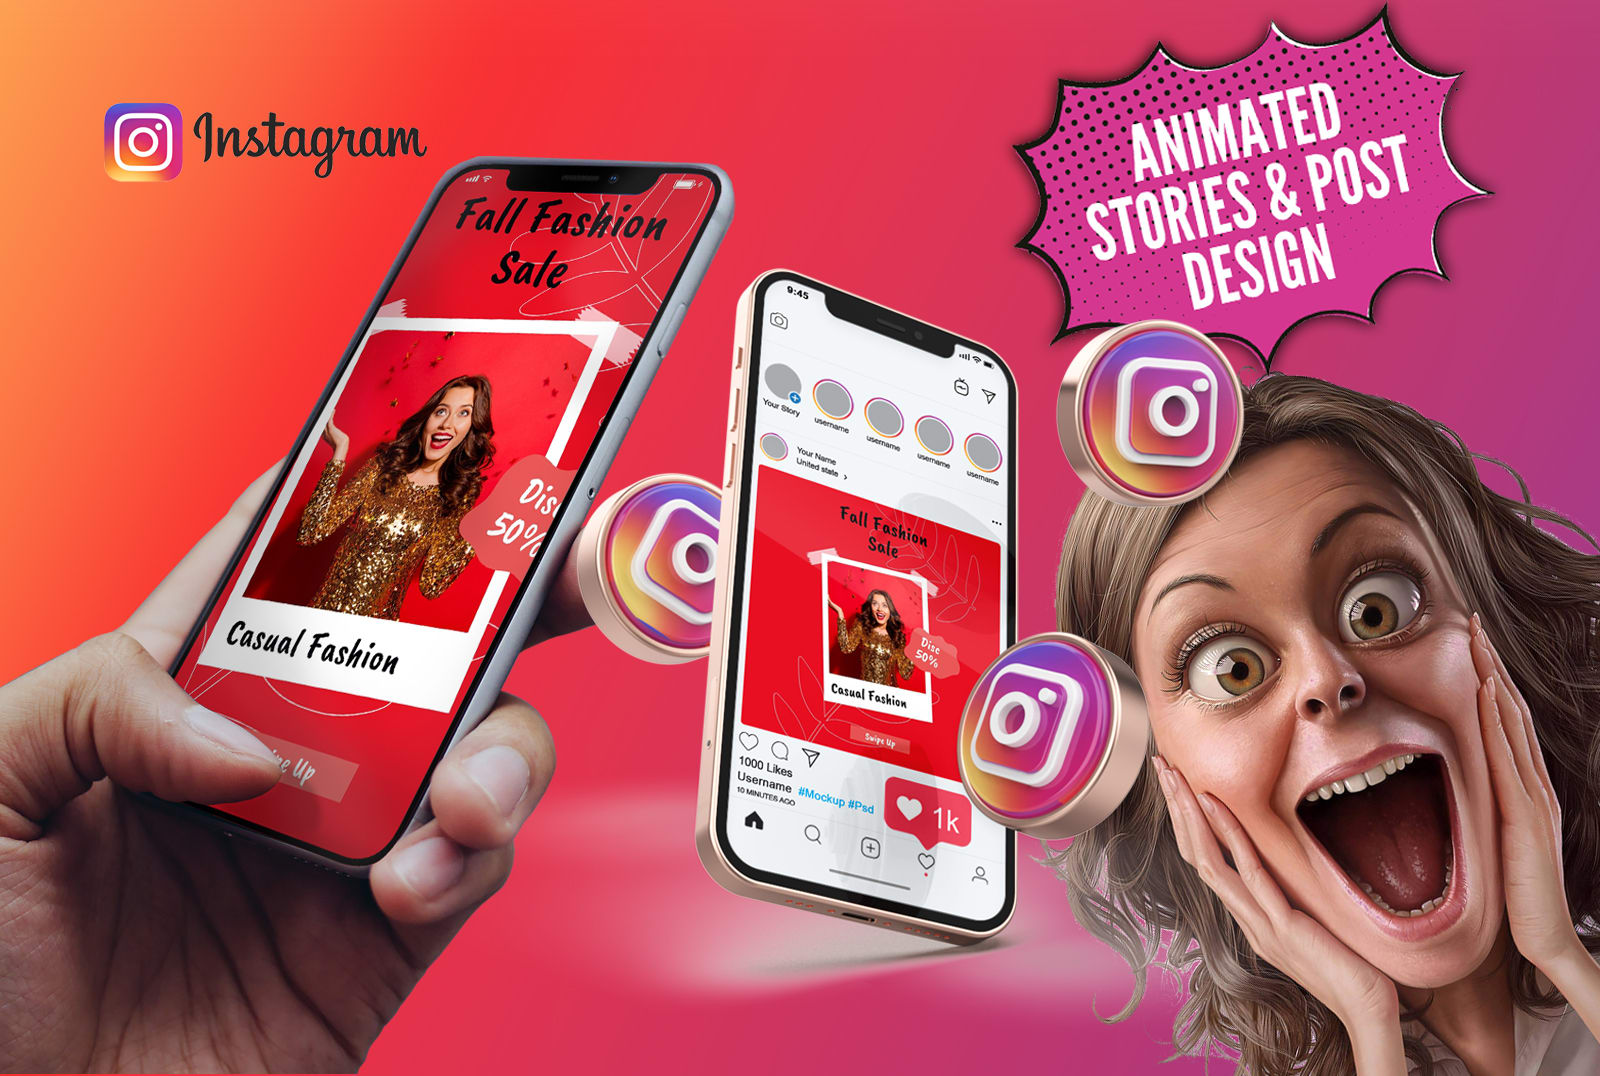 Instagram animated stories and post design expert by Nymgilman | Fiverr